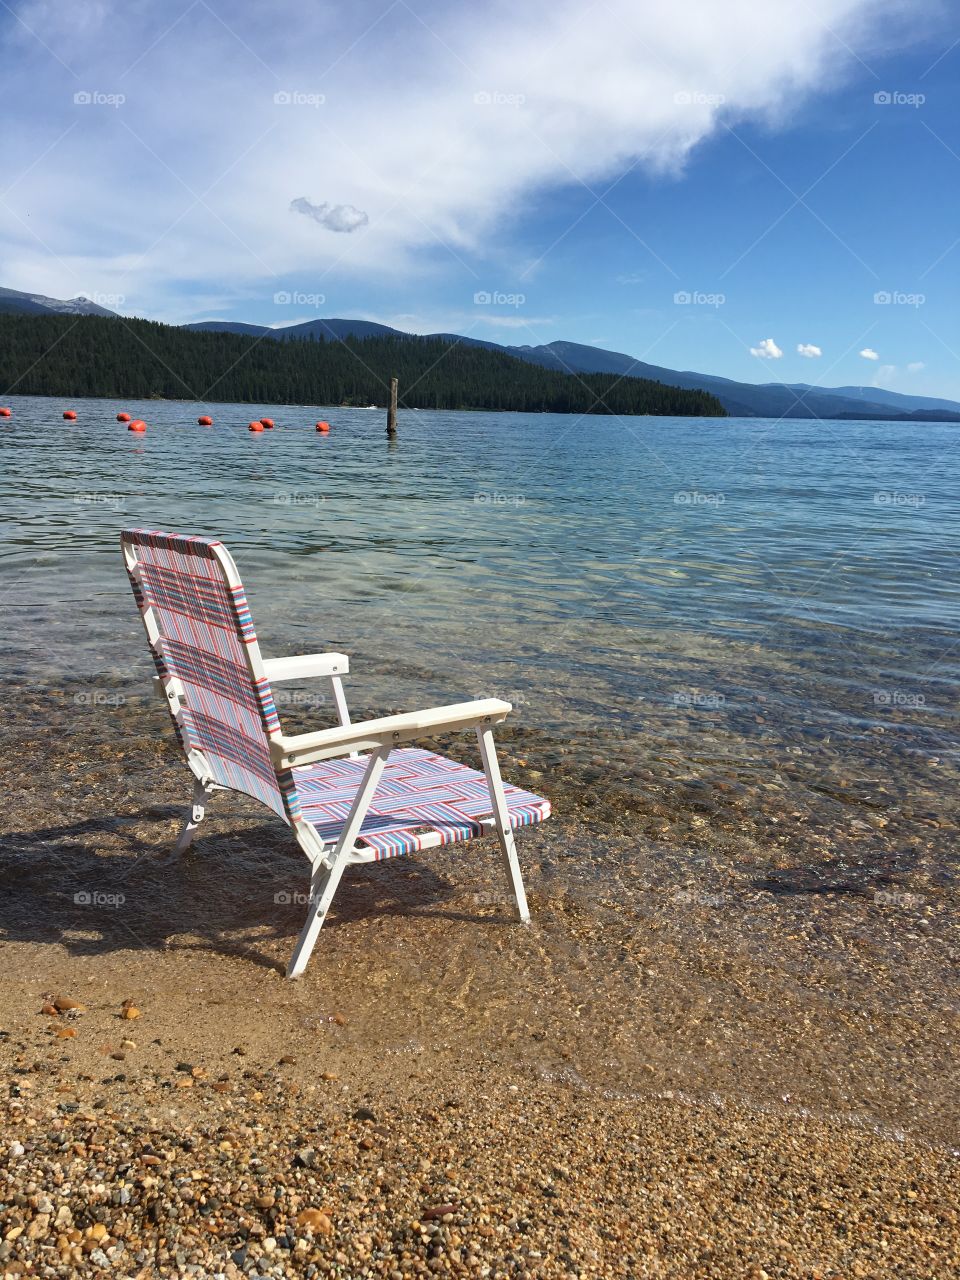 A Seat By The Sea.

Okay, it's actually a lake, but the name sounds better this way. Taken at Priest Lake in northern Idaho.